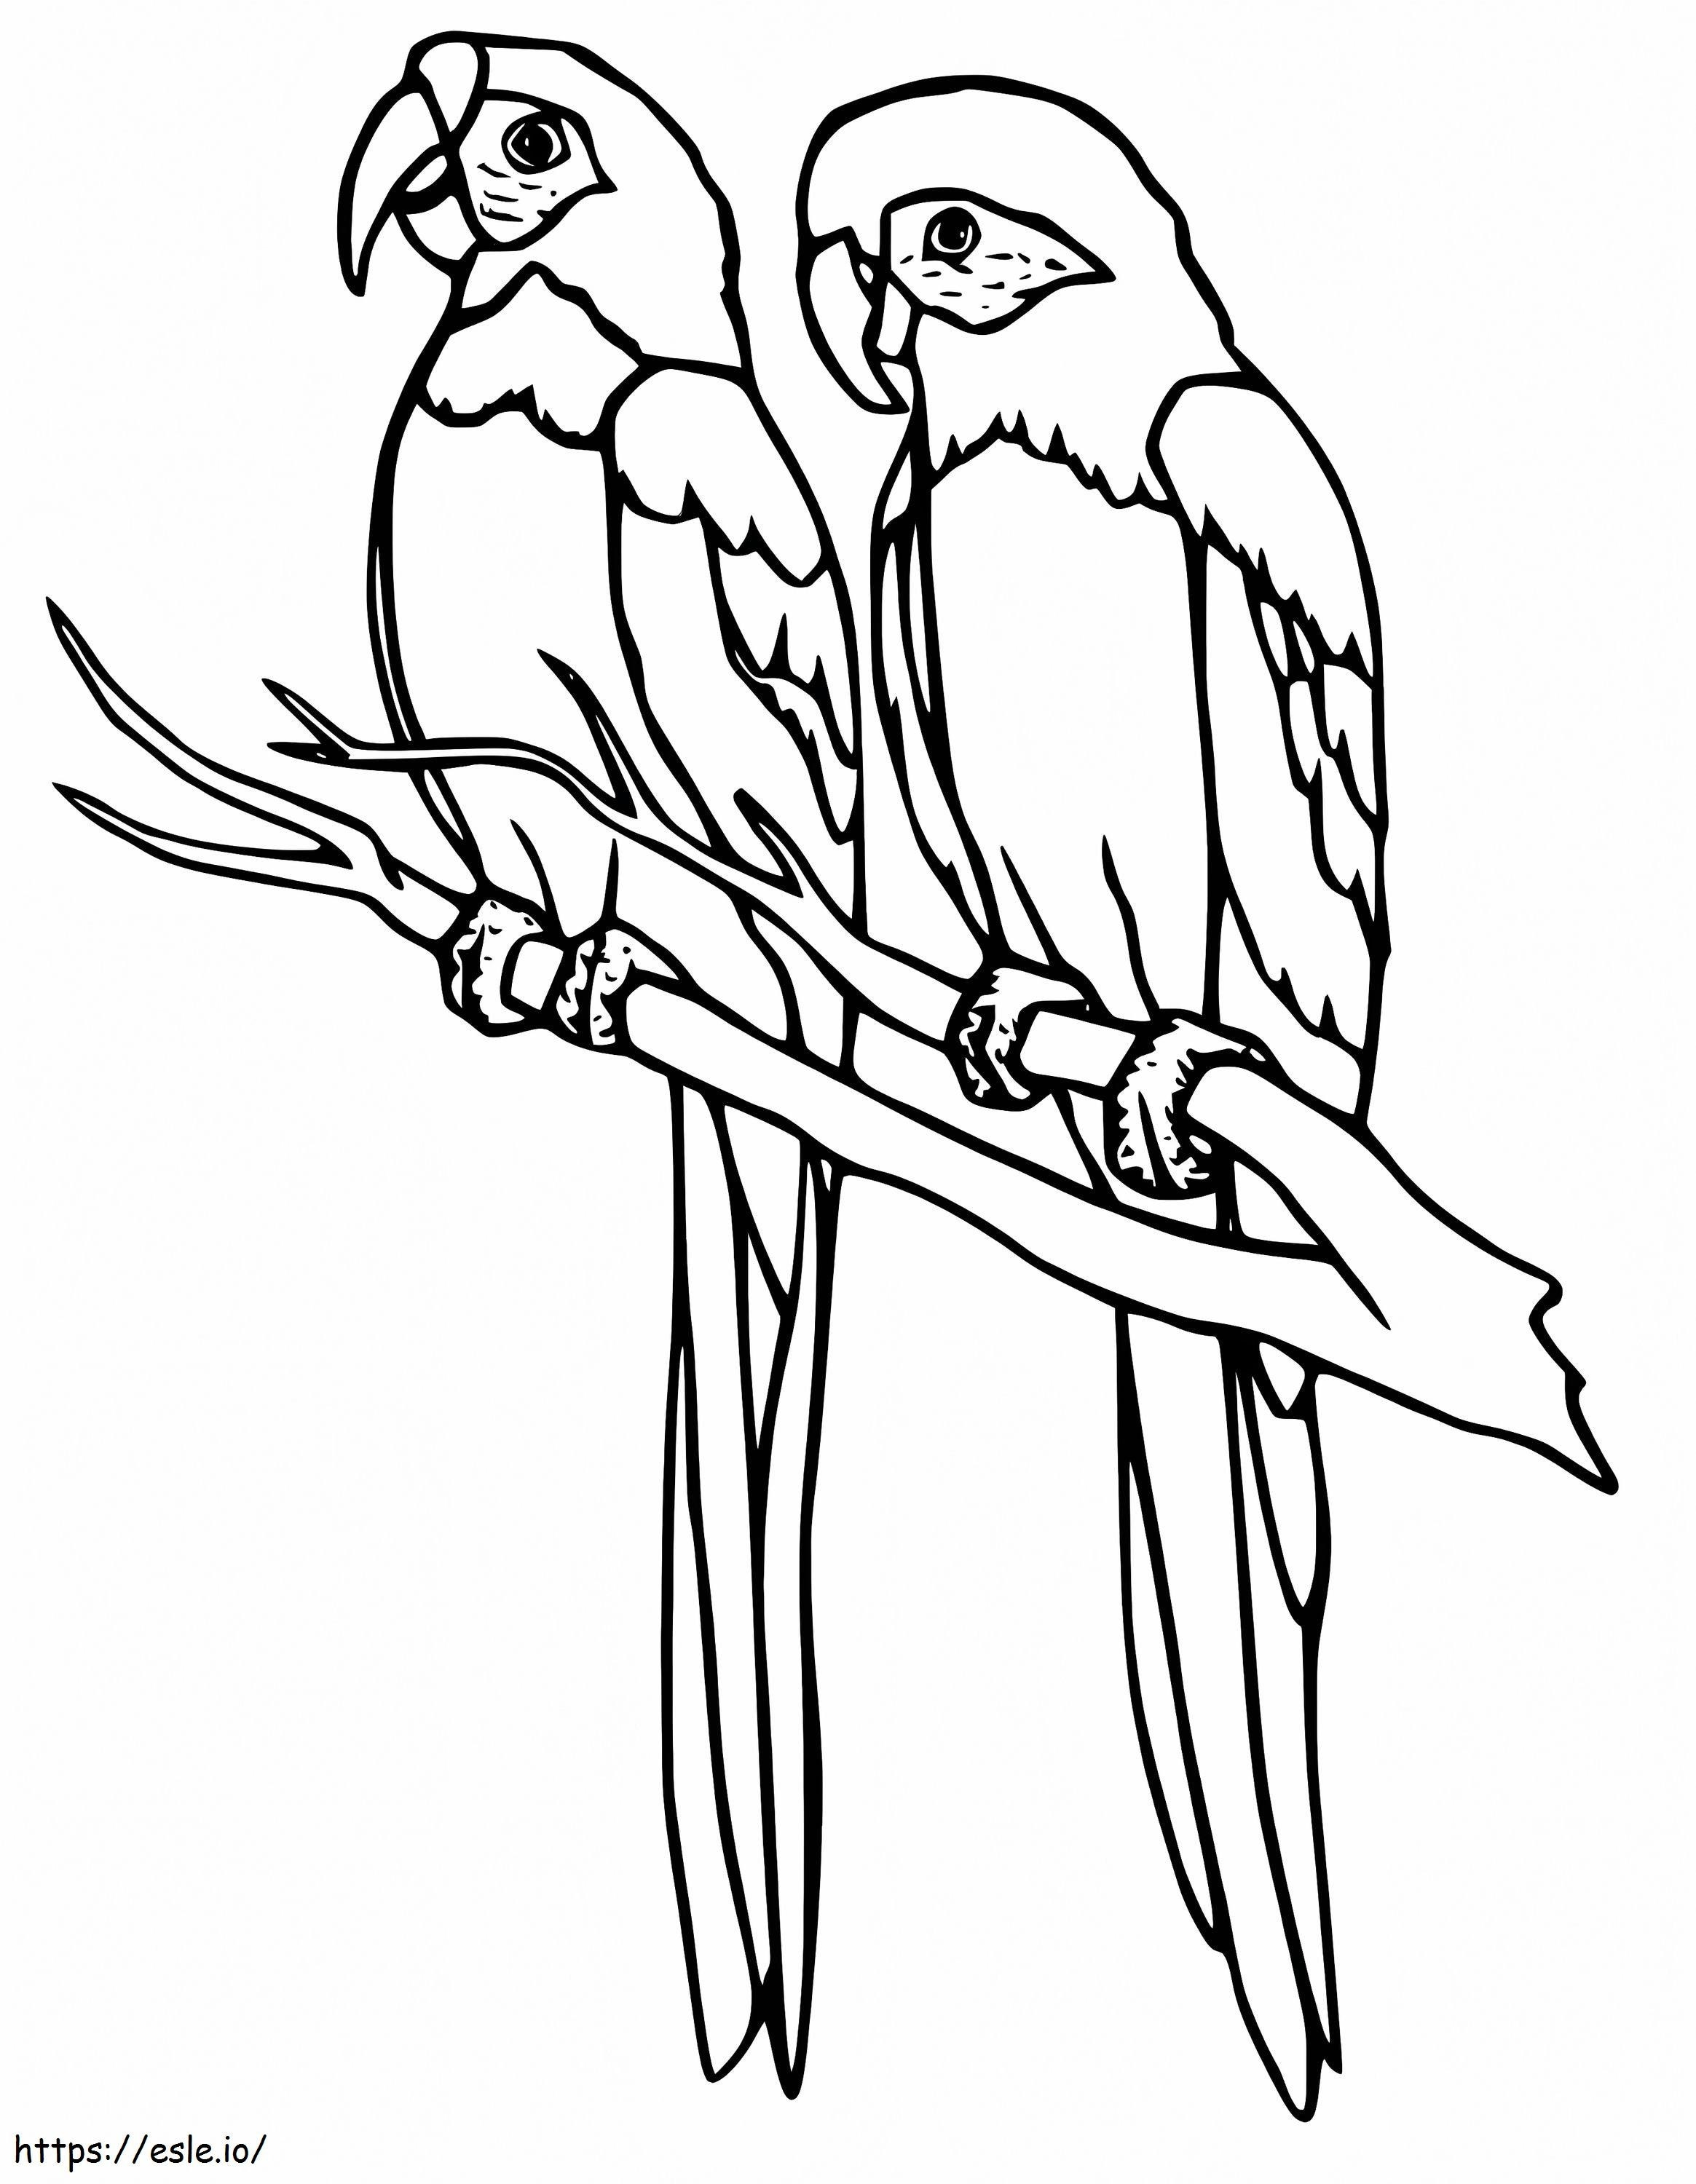 Parakeets On Branch coloring page